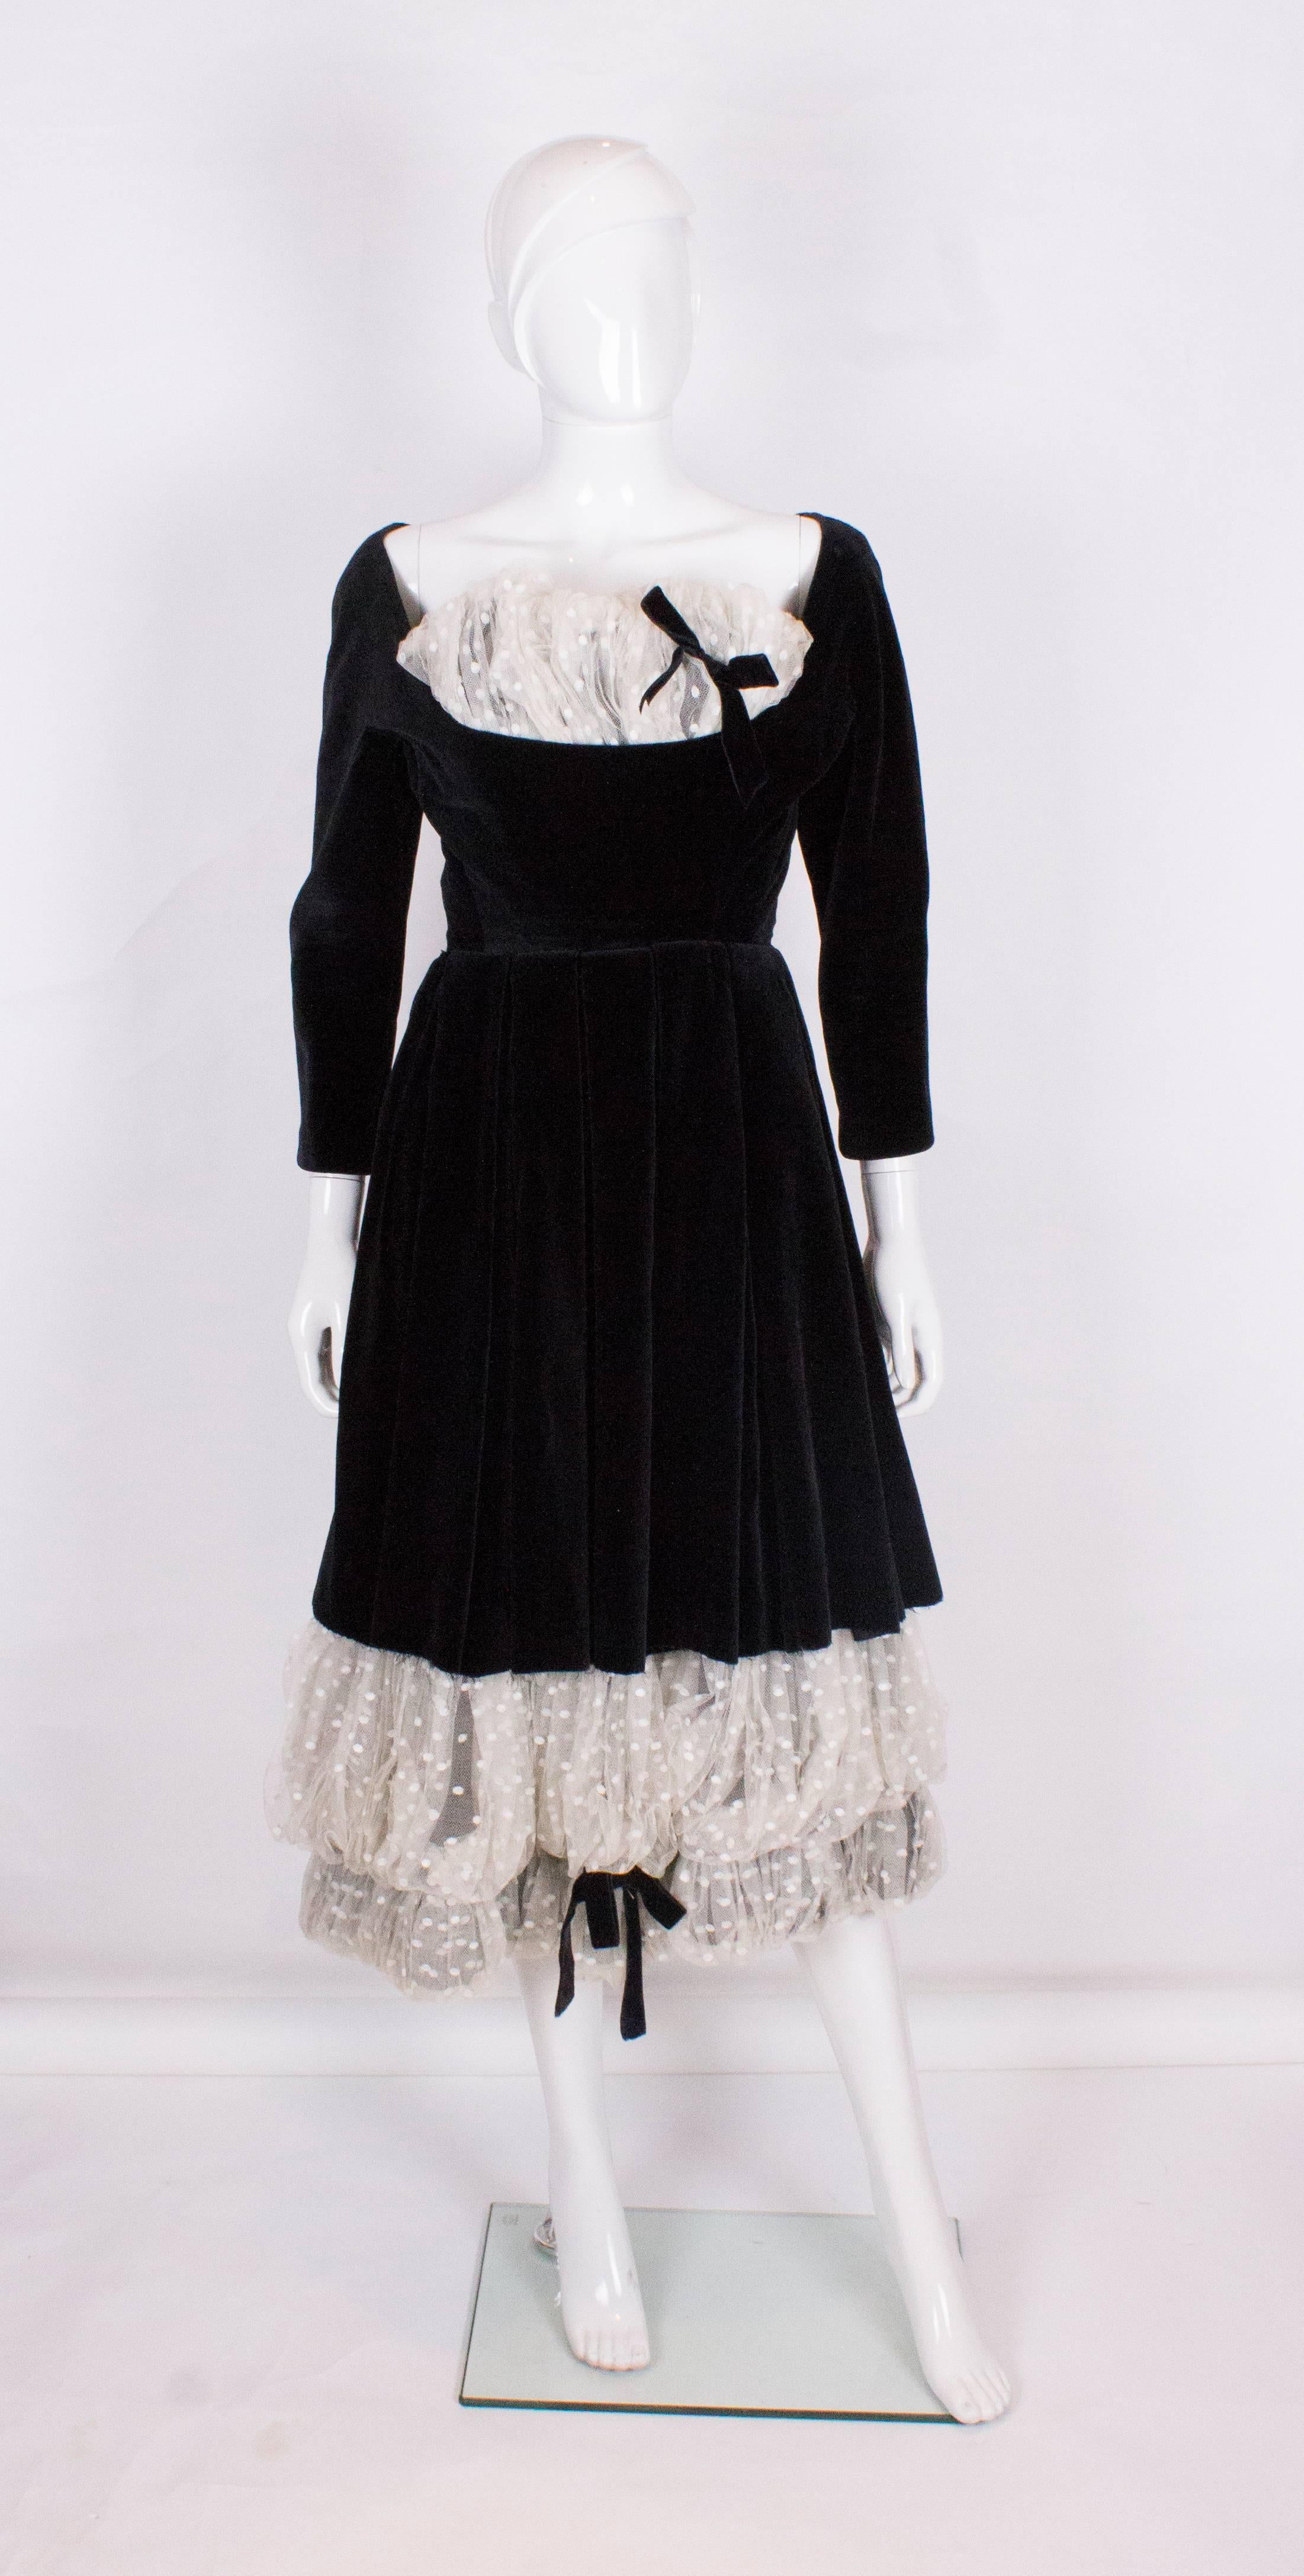 A vintage 1950s Black velvet and lace cocktail dress Very Dior

The dress in a black velvet with a white - grey polka dot lace with velvet trim on hem and a lace ruffle bust detail nipped in waist and three quarter length sleeves 

Almost identical